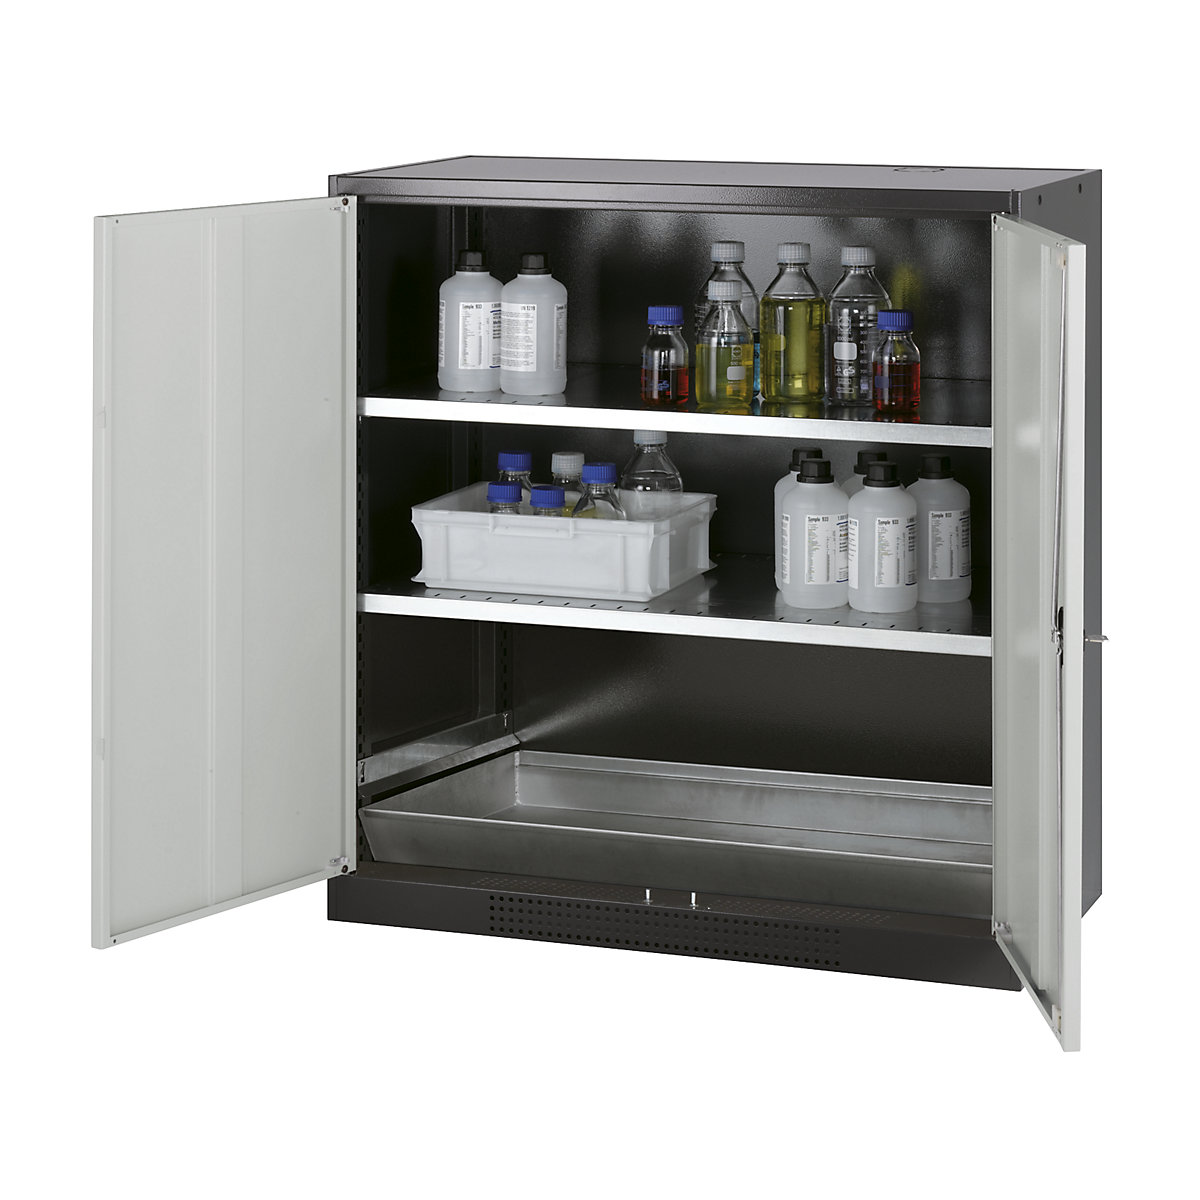 Laboratory chemical storage cupboard – asecos, 2 door, half height, 2 shelves, without vision panel, grey-4